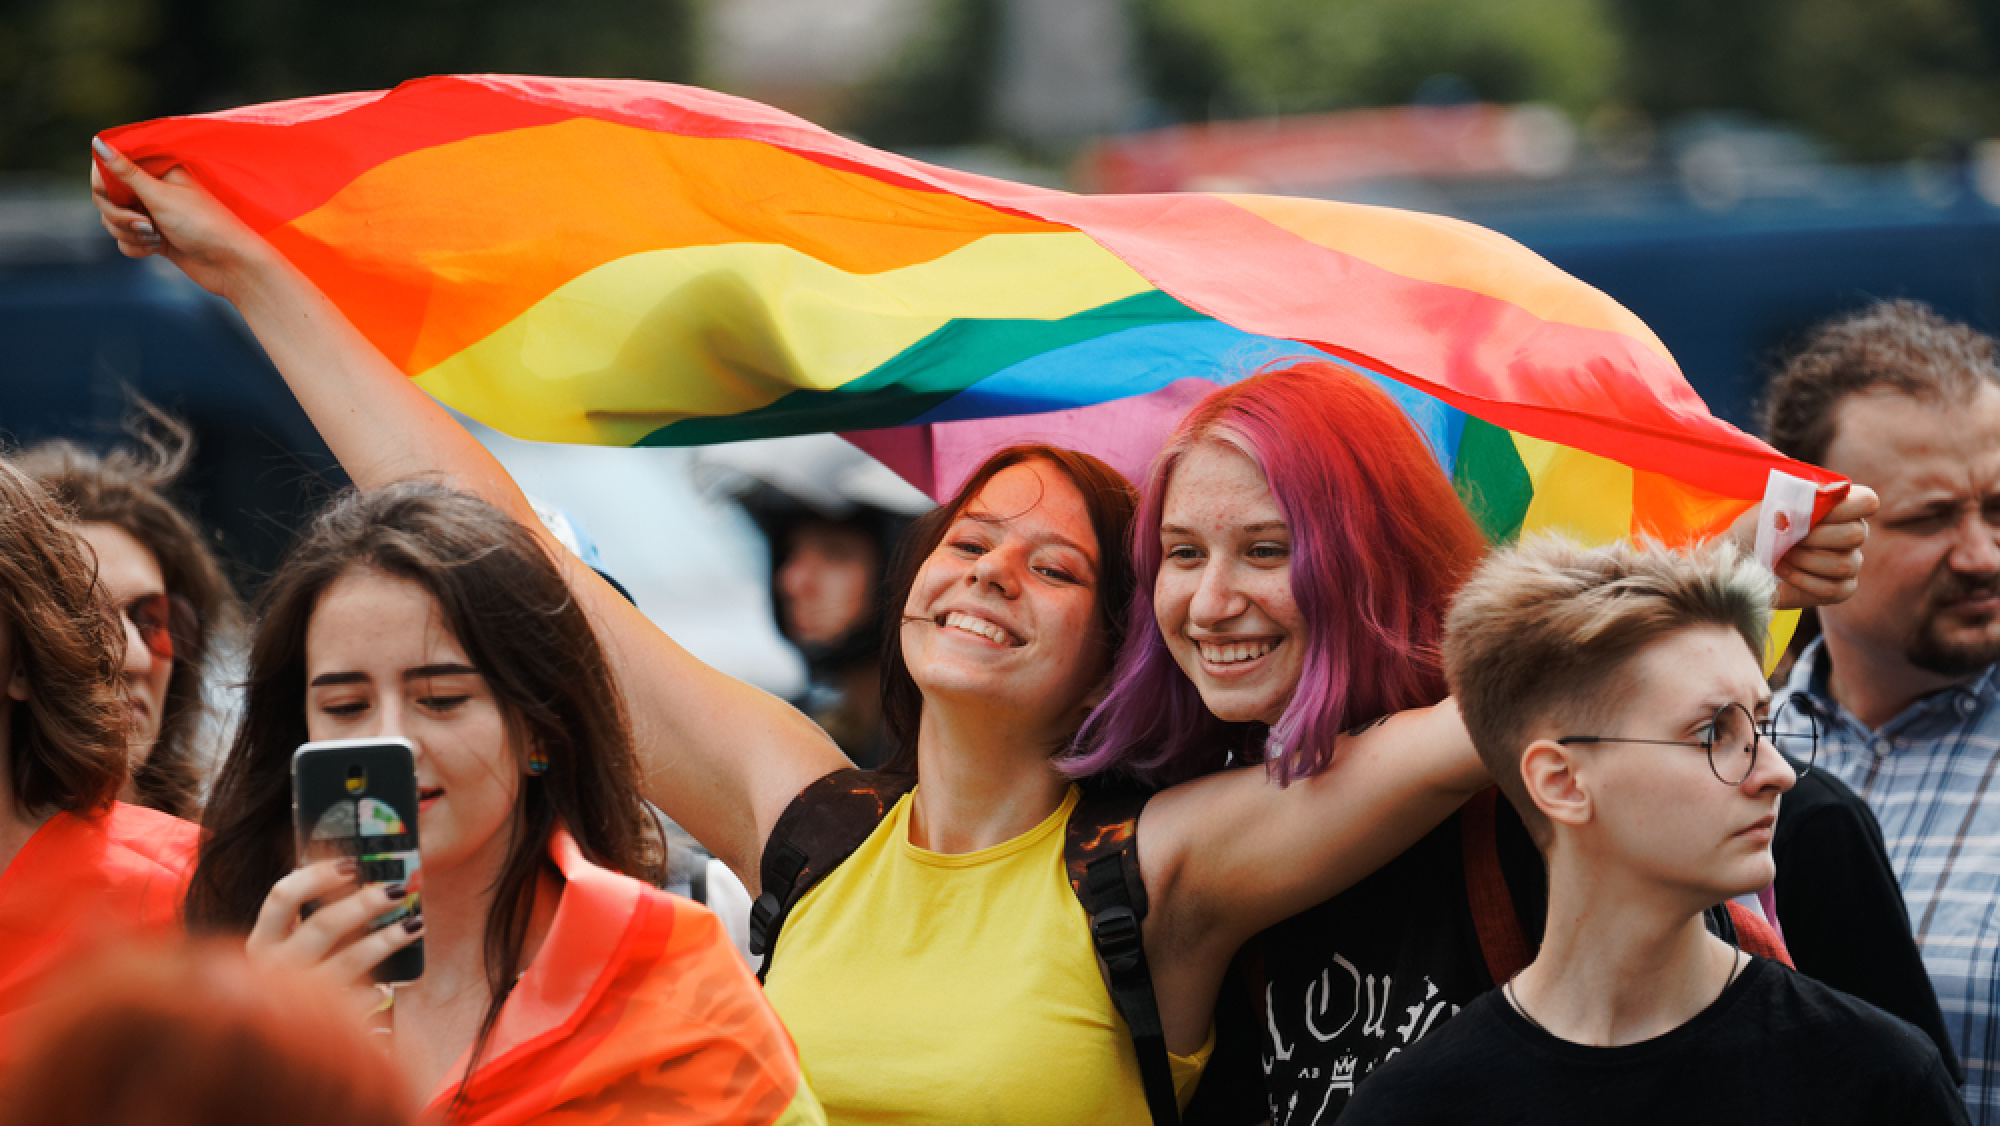 A Long Path To Equality: Where Is Ukraine On LGBT Rights?